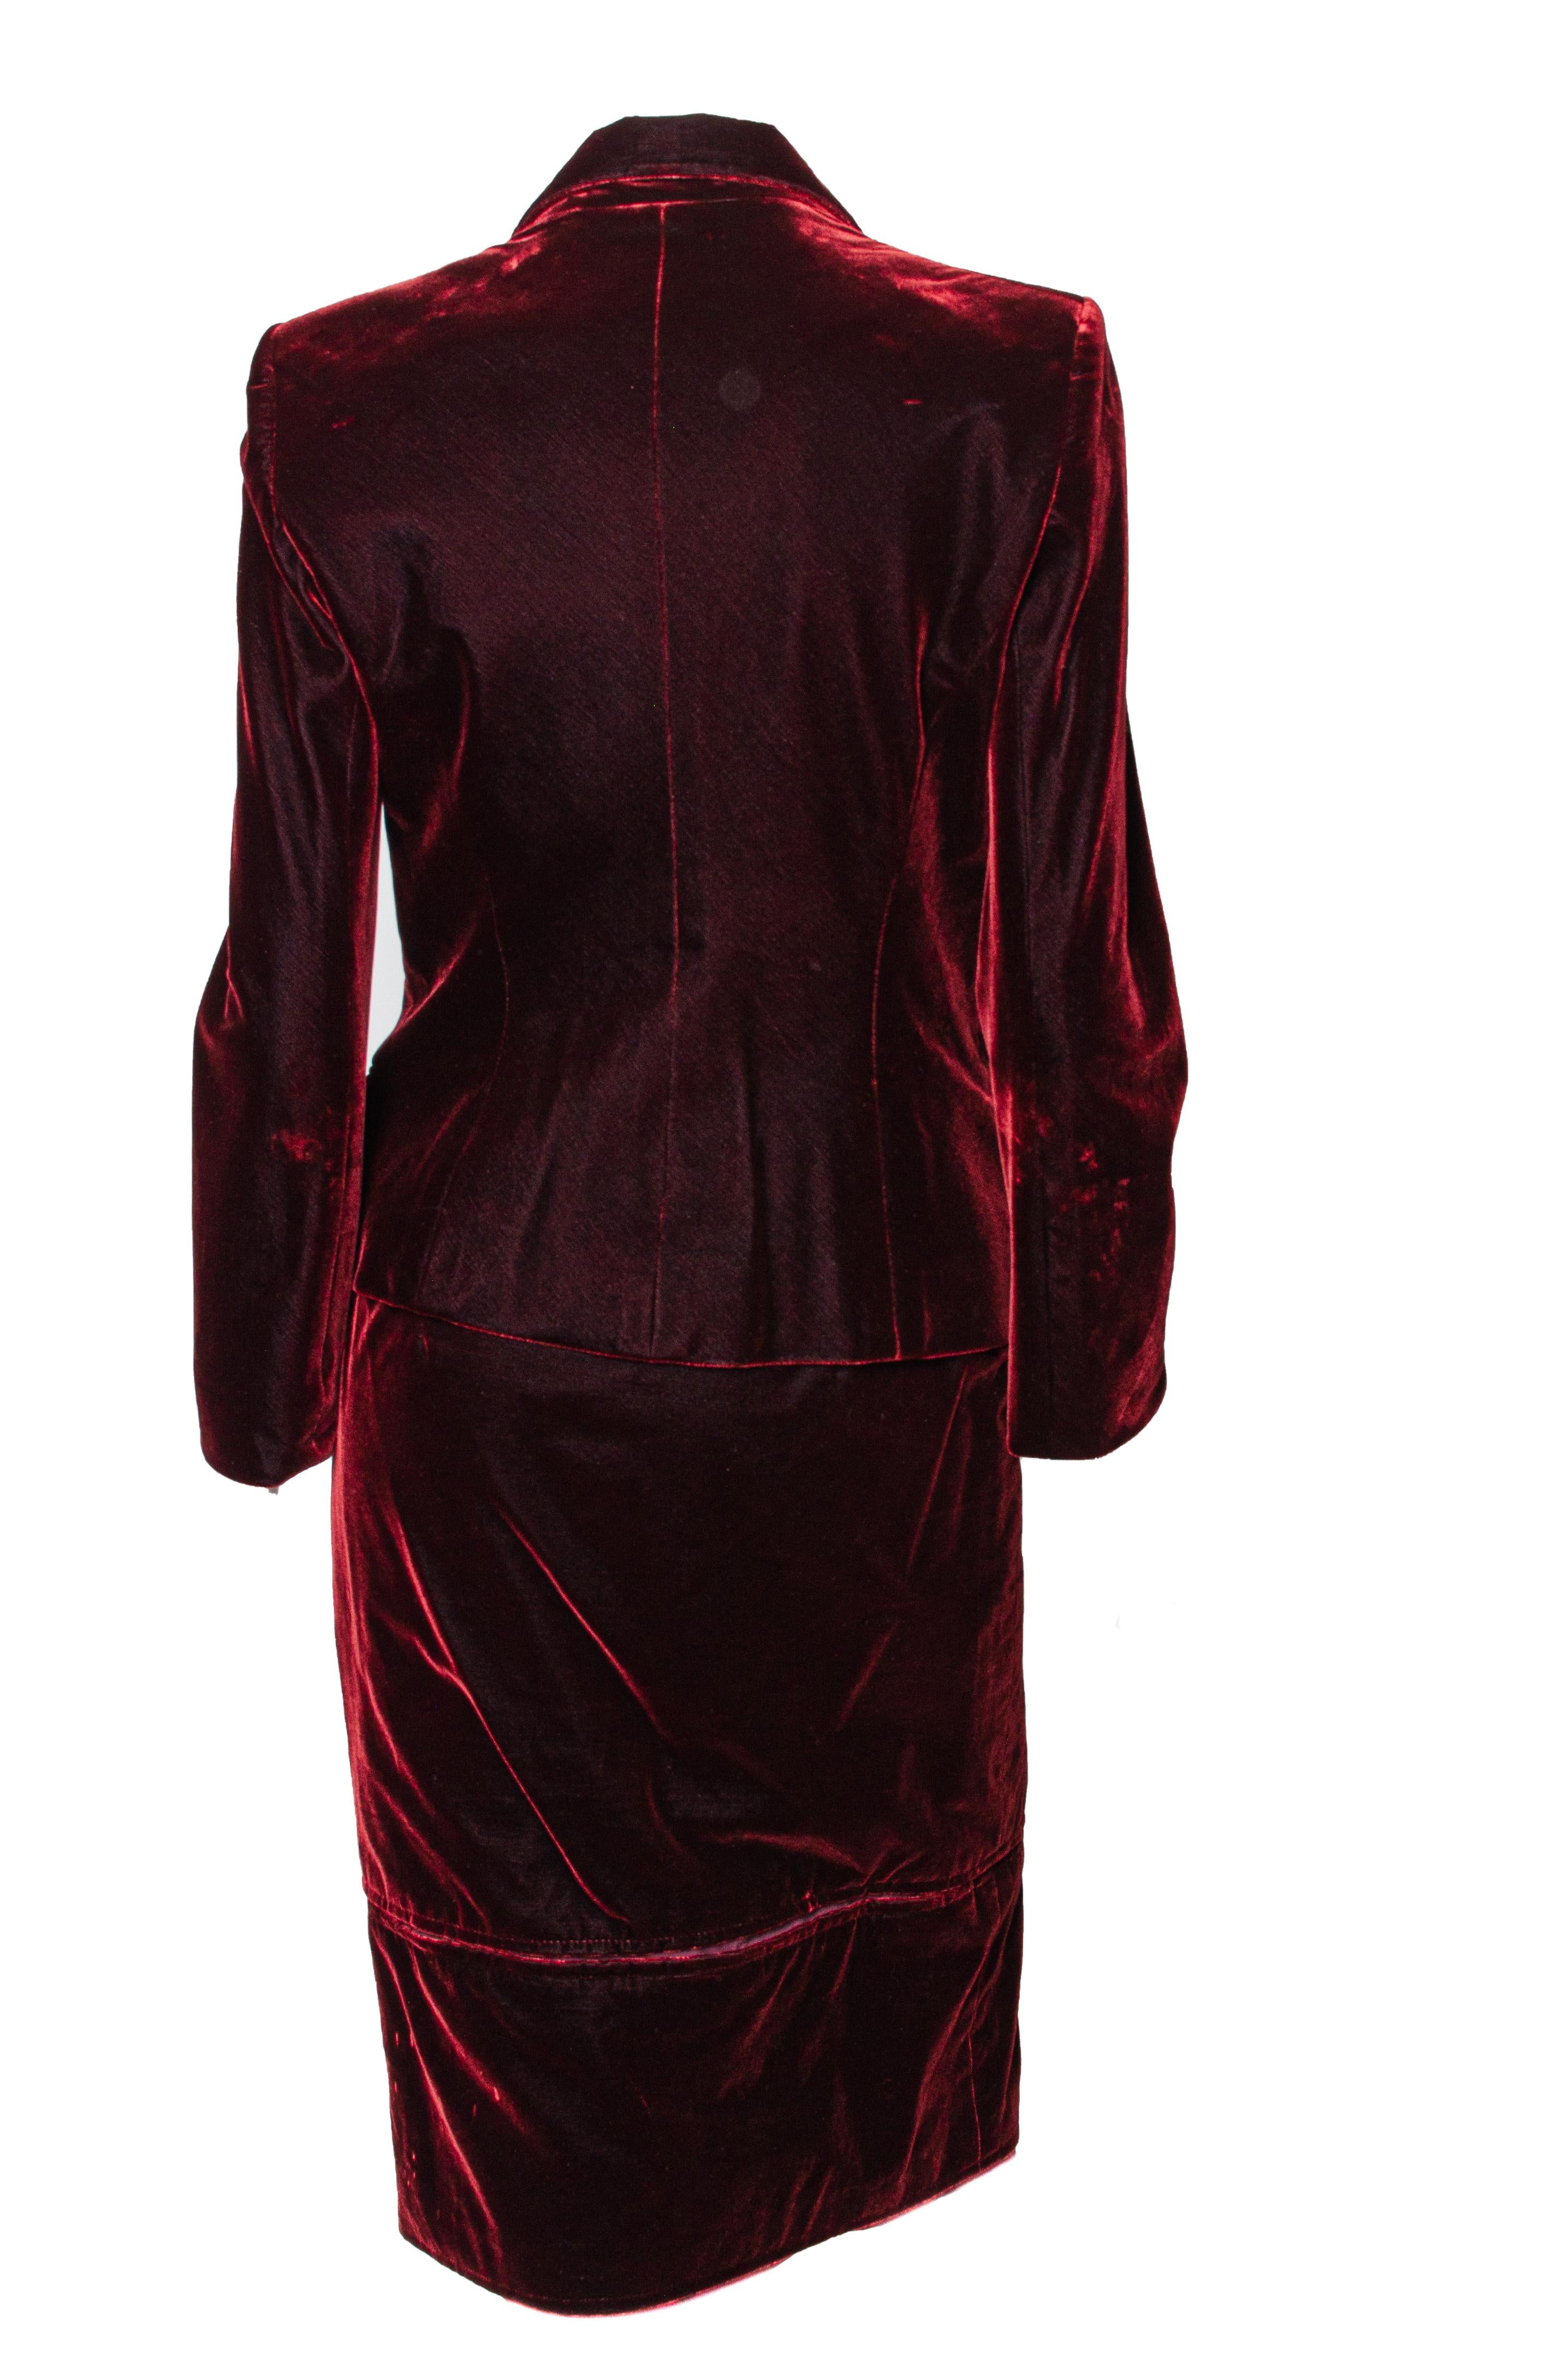 F/W 2002 Yves Saint Laurent by Tom Ford Red Velvet Skirt Suit In Good Condition For Sale In West Hollywood, CA